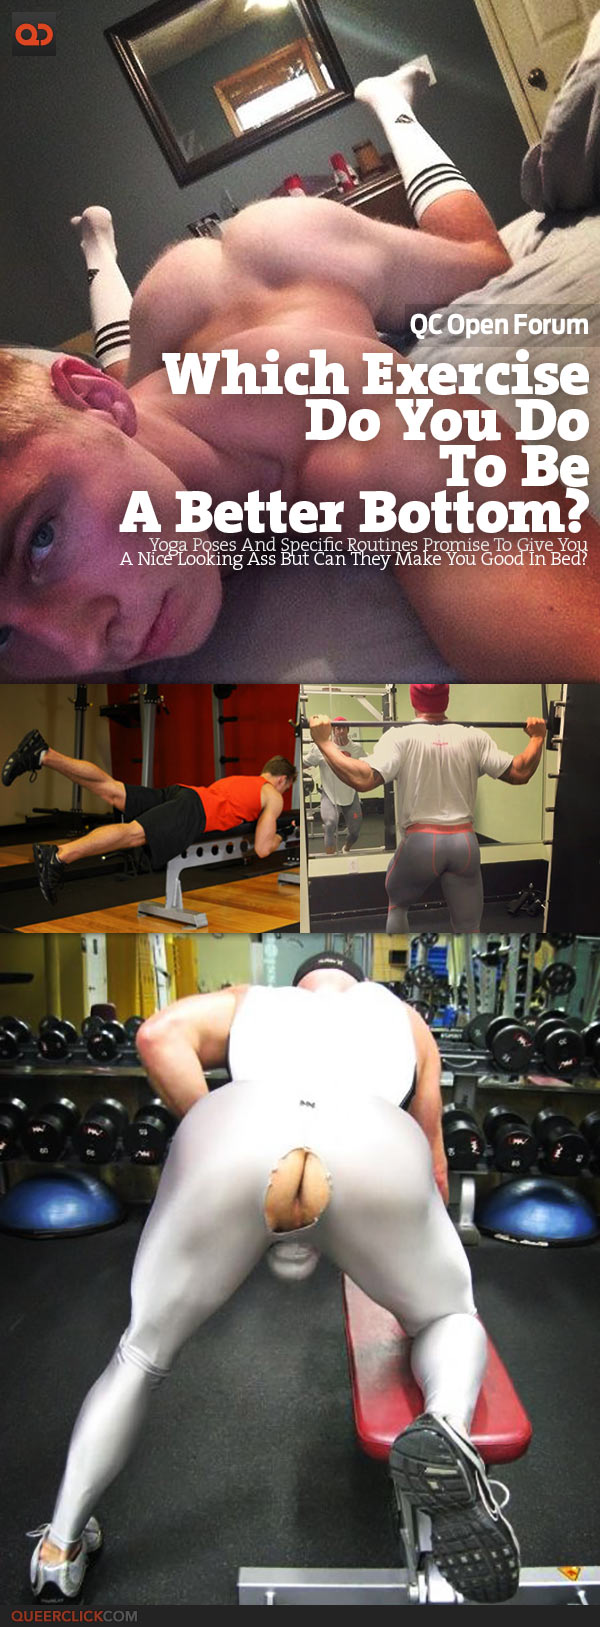 QC Open Forum: Which Exercise Do You Do To Be A Better Bottom?